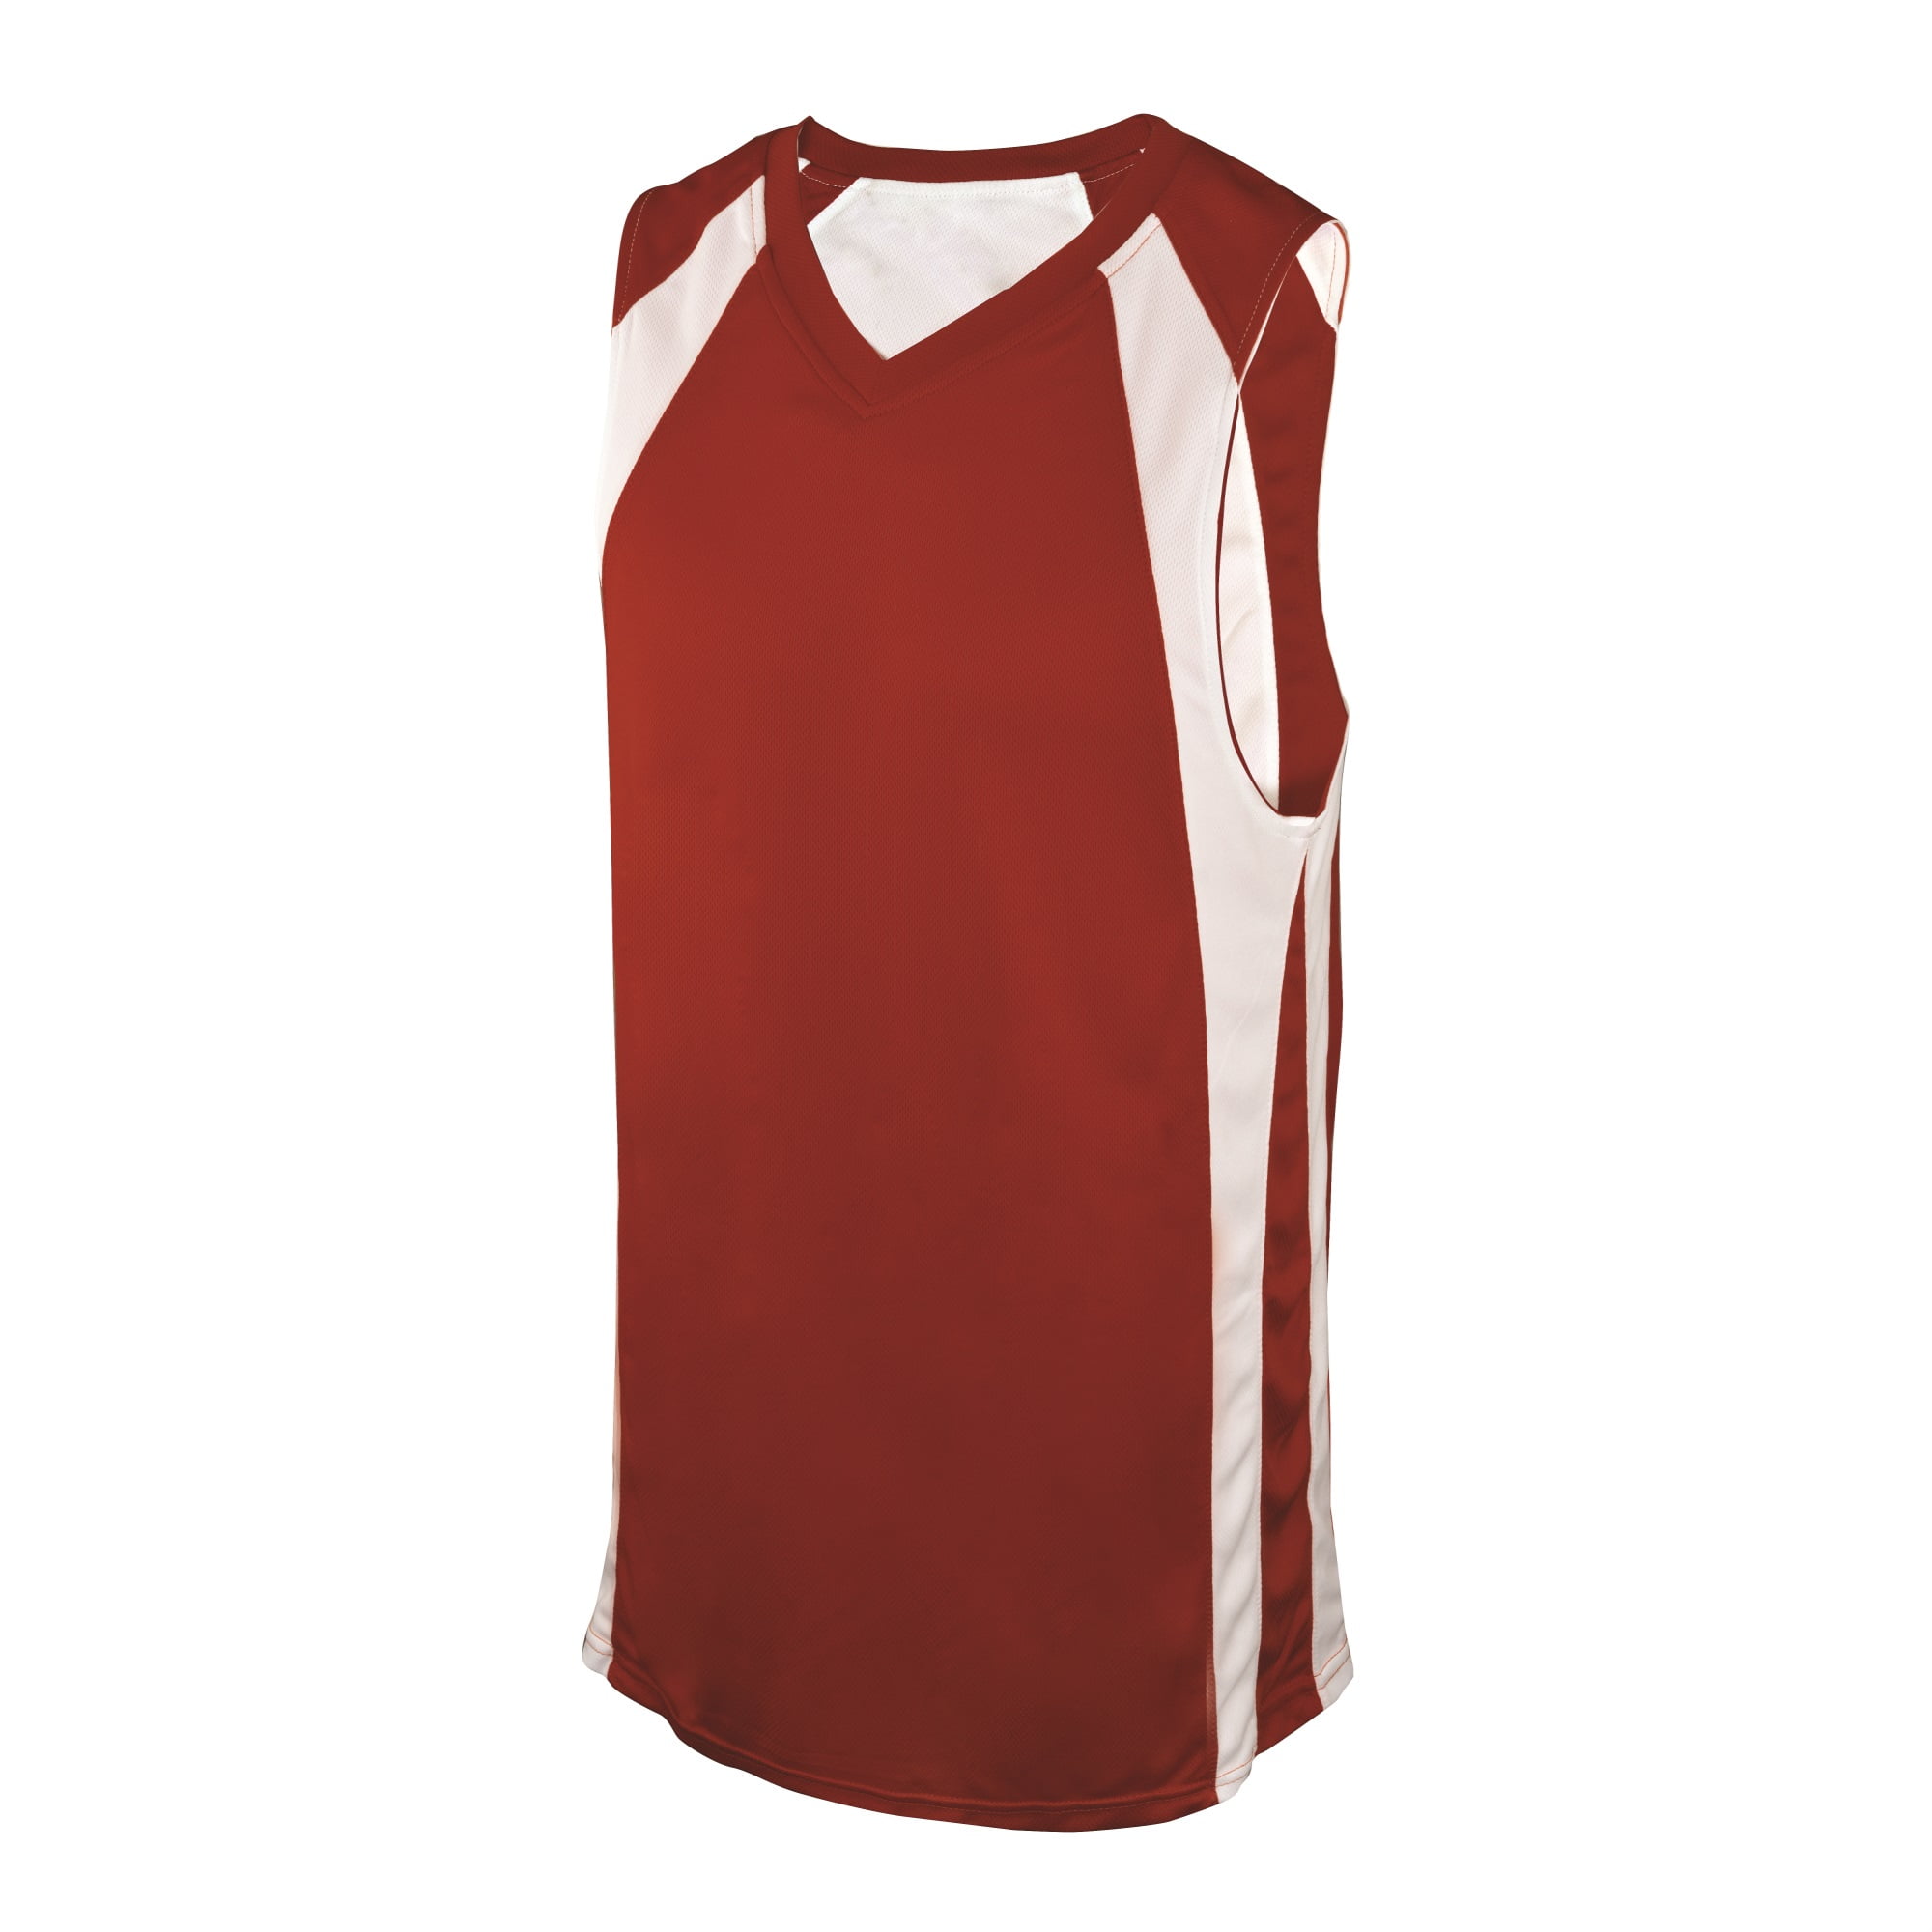 Martin Sports Rev. Basketball Jersey, Red/White, Adult-Large